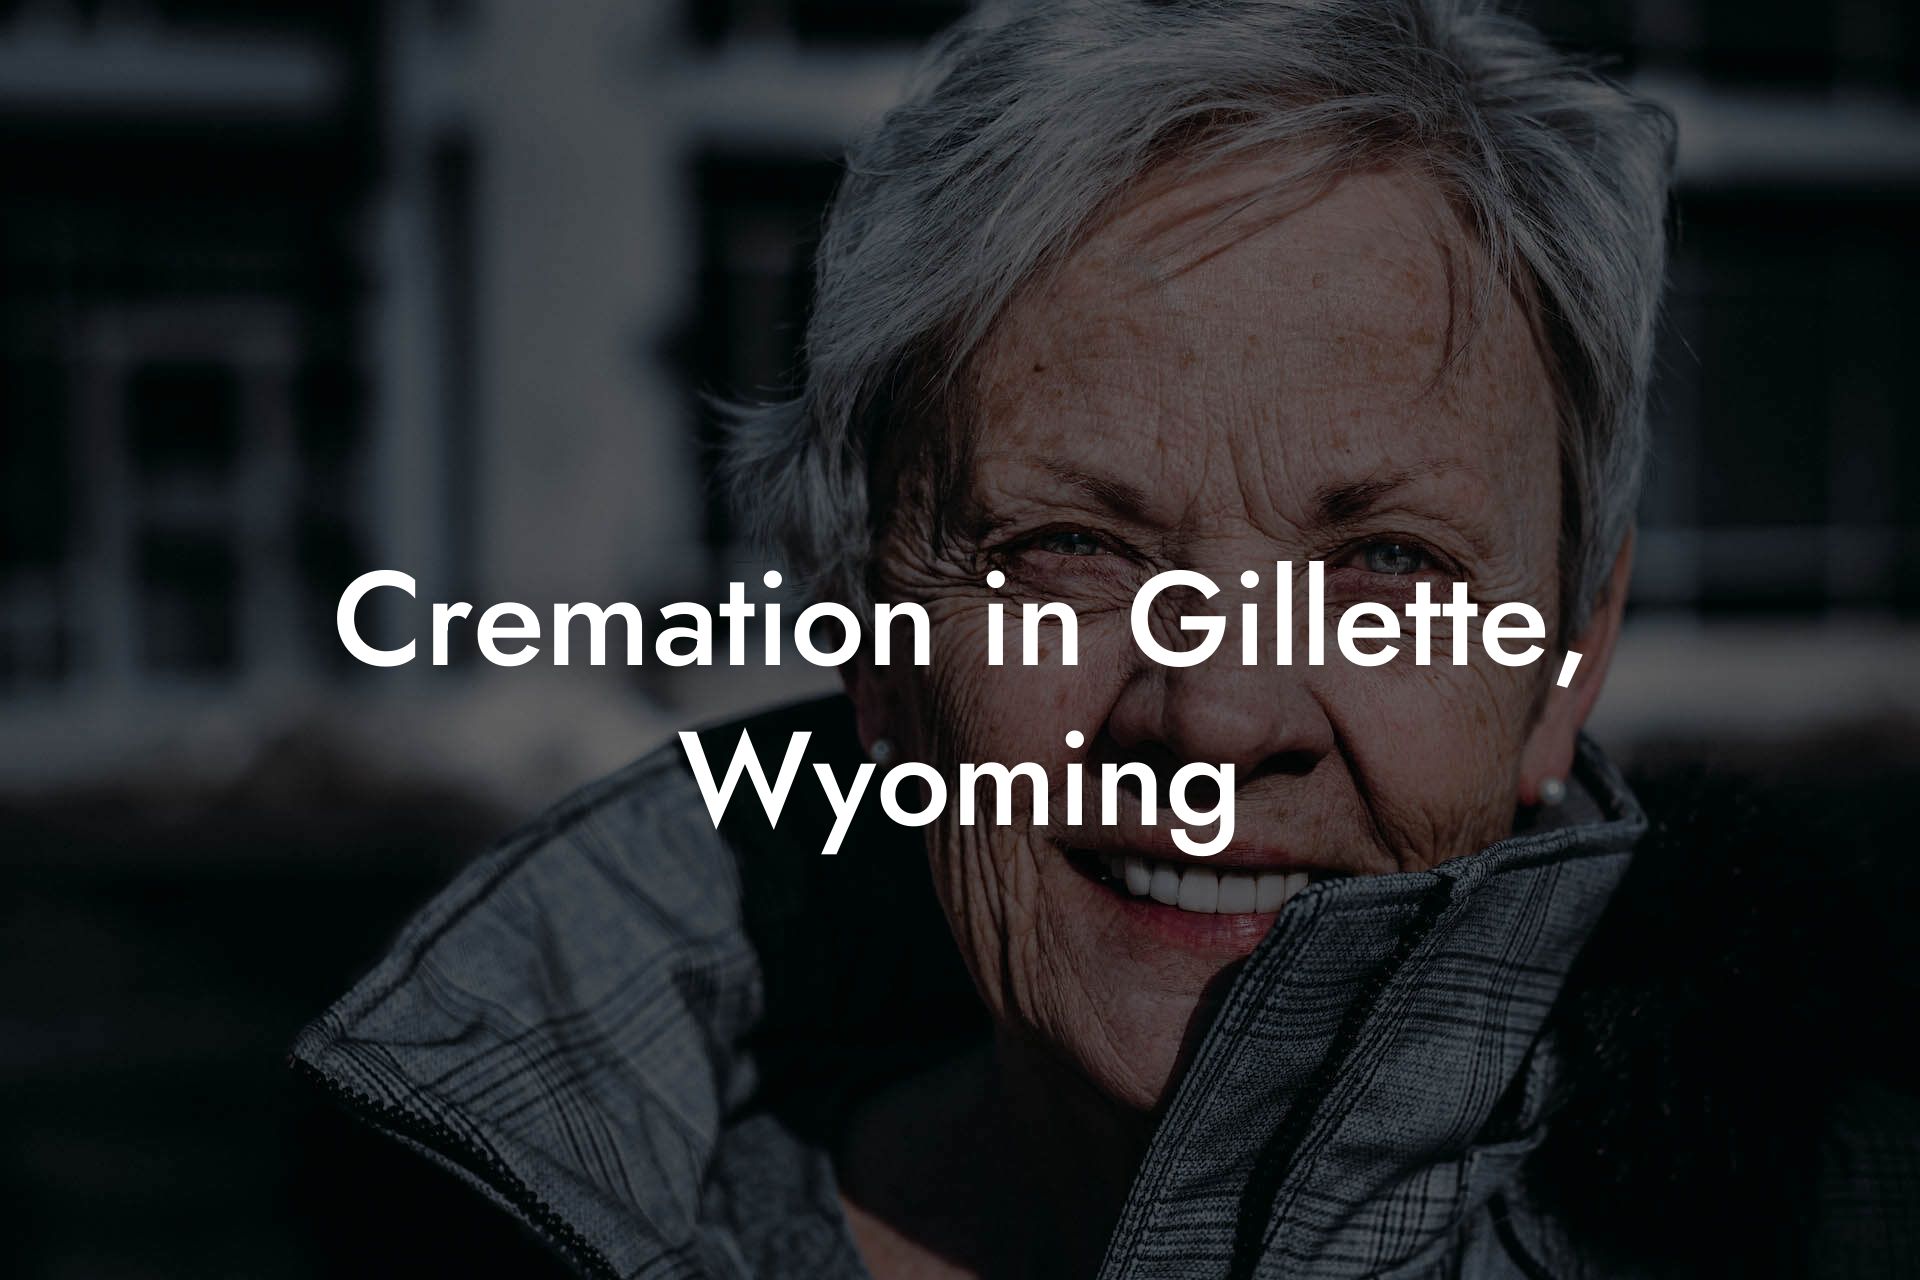 Cremation in Gillette, Wyoming